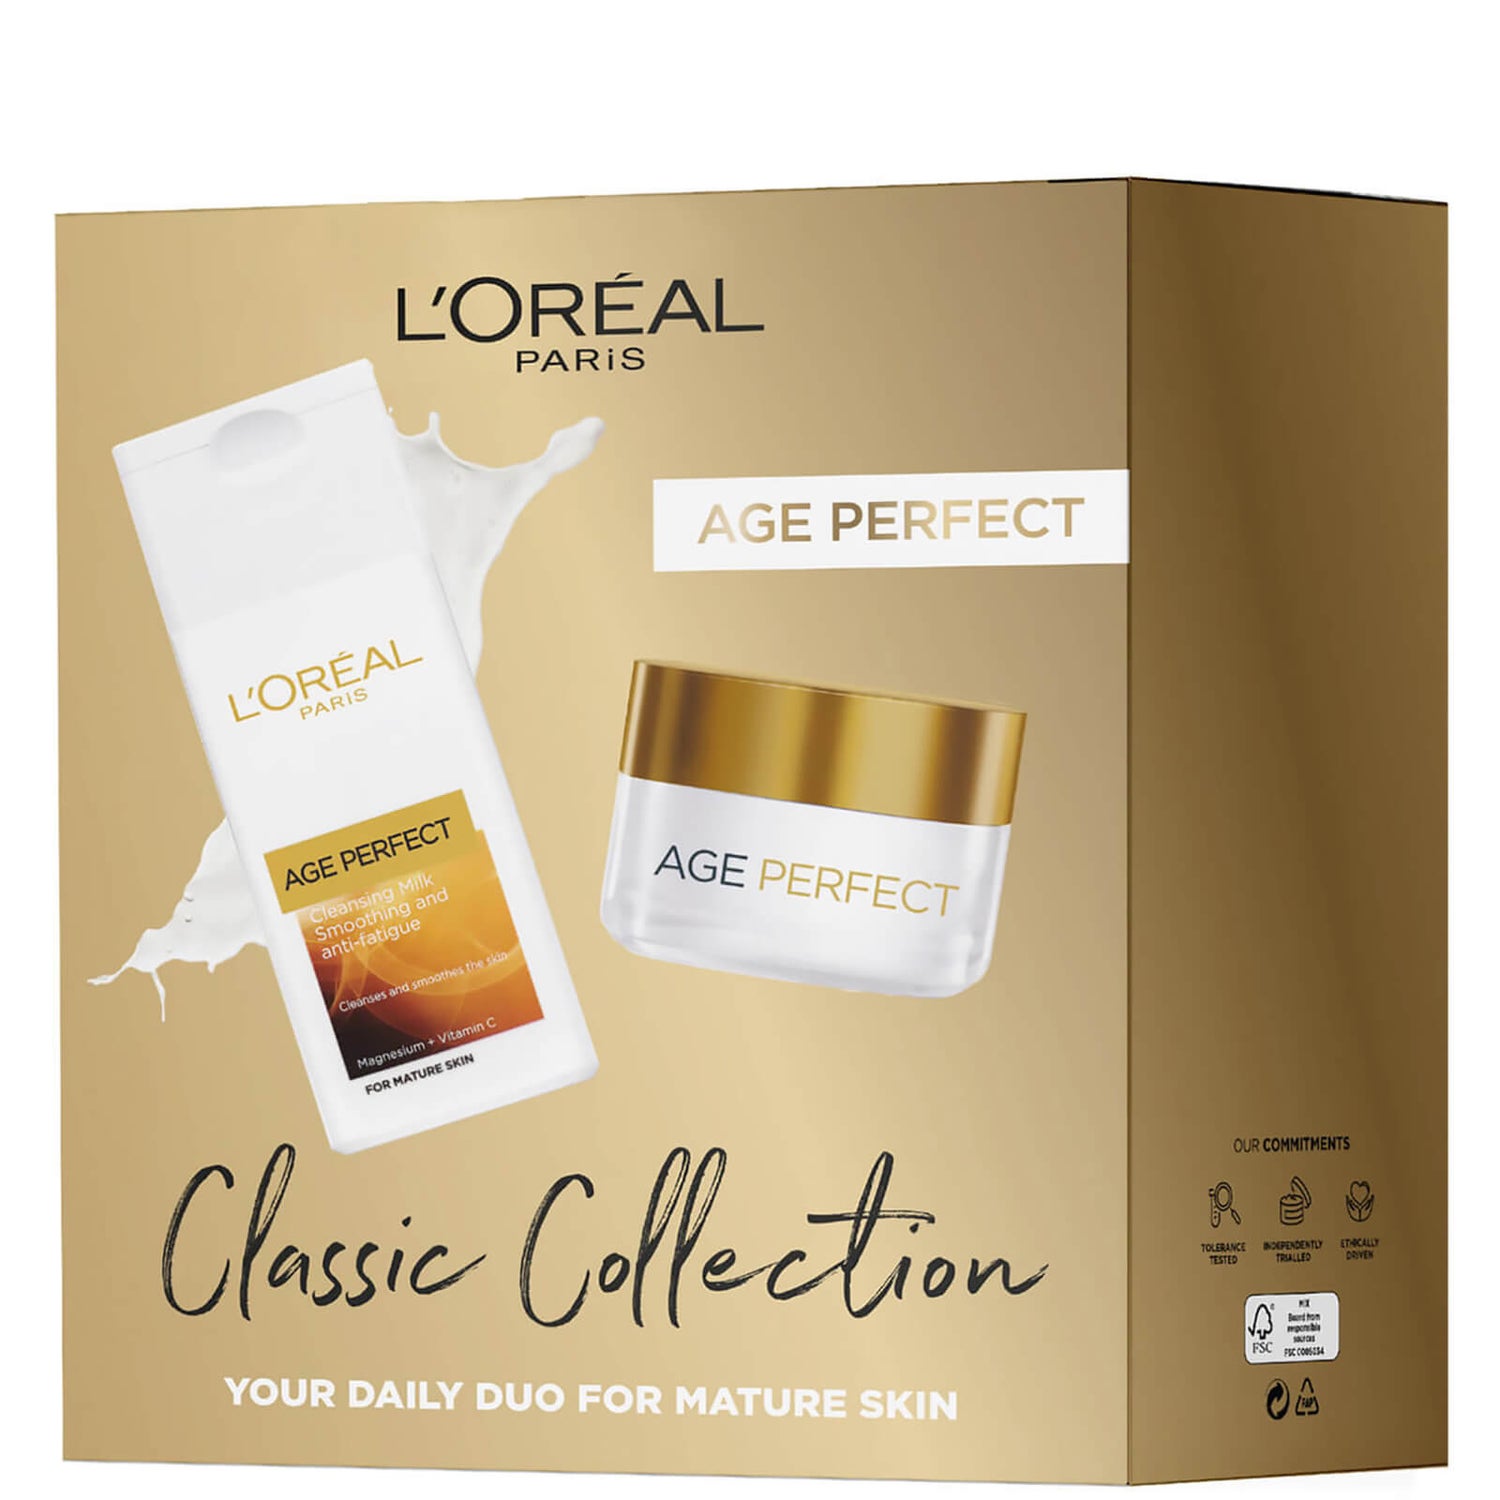 L'Oreal Paris Age Perfect Cleanser & Day Cream Classic Collection Gift Set for Her